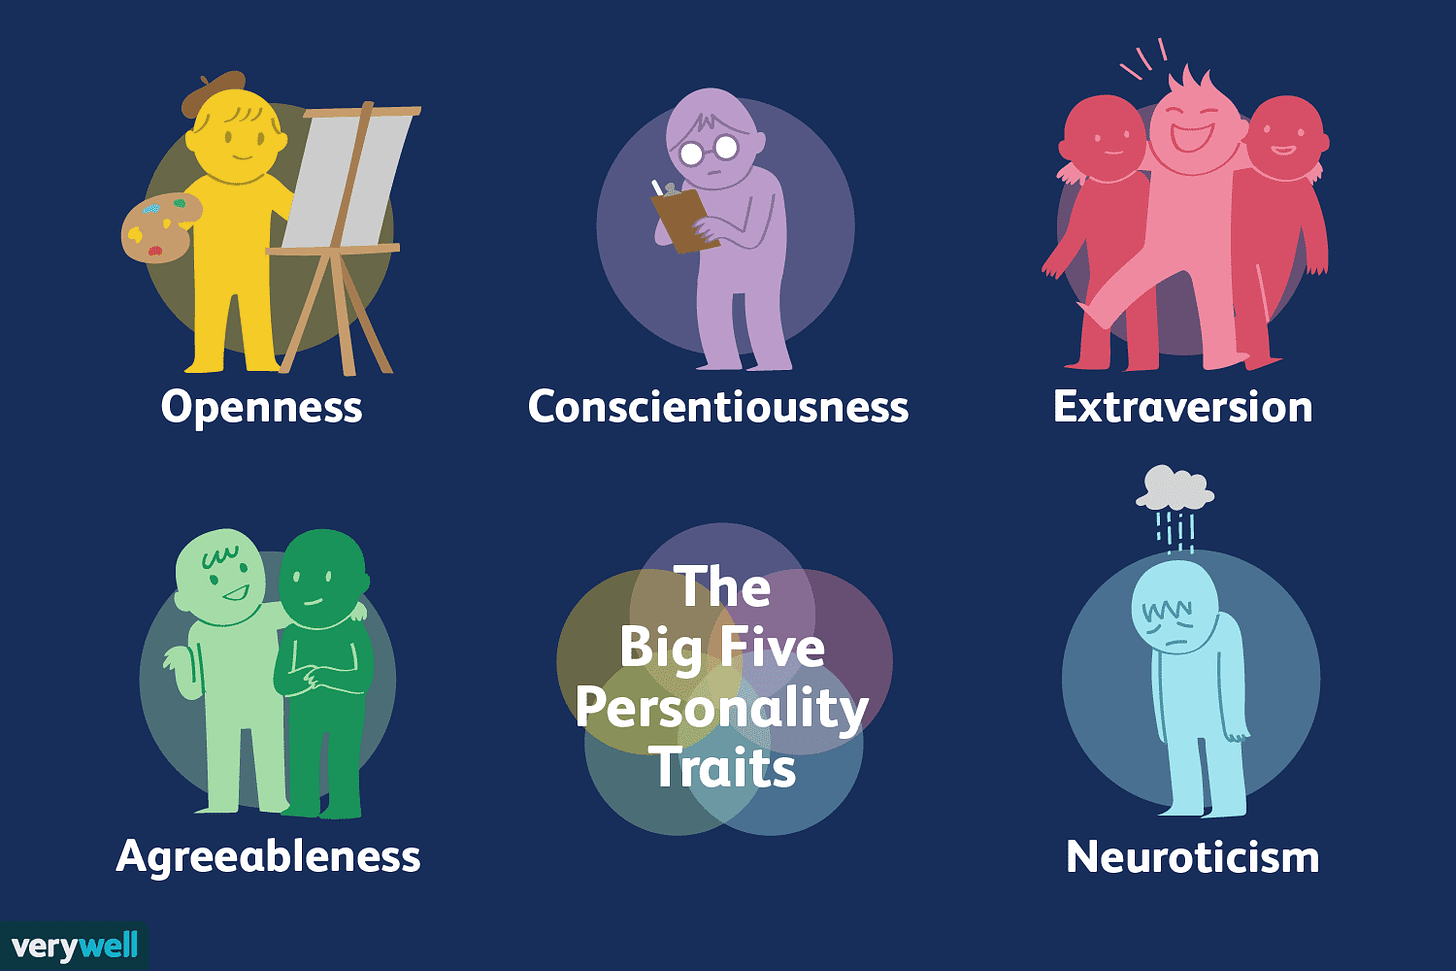 What Are the Big 5 Personality Traits?